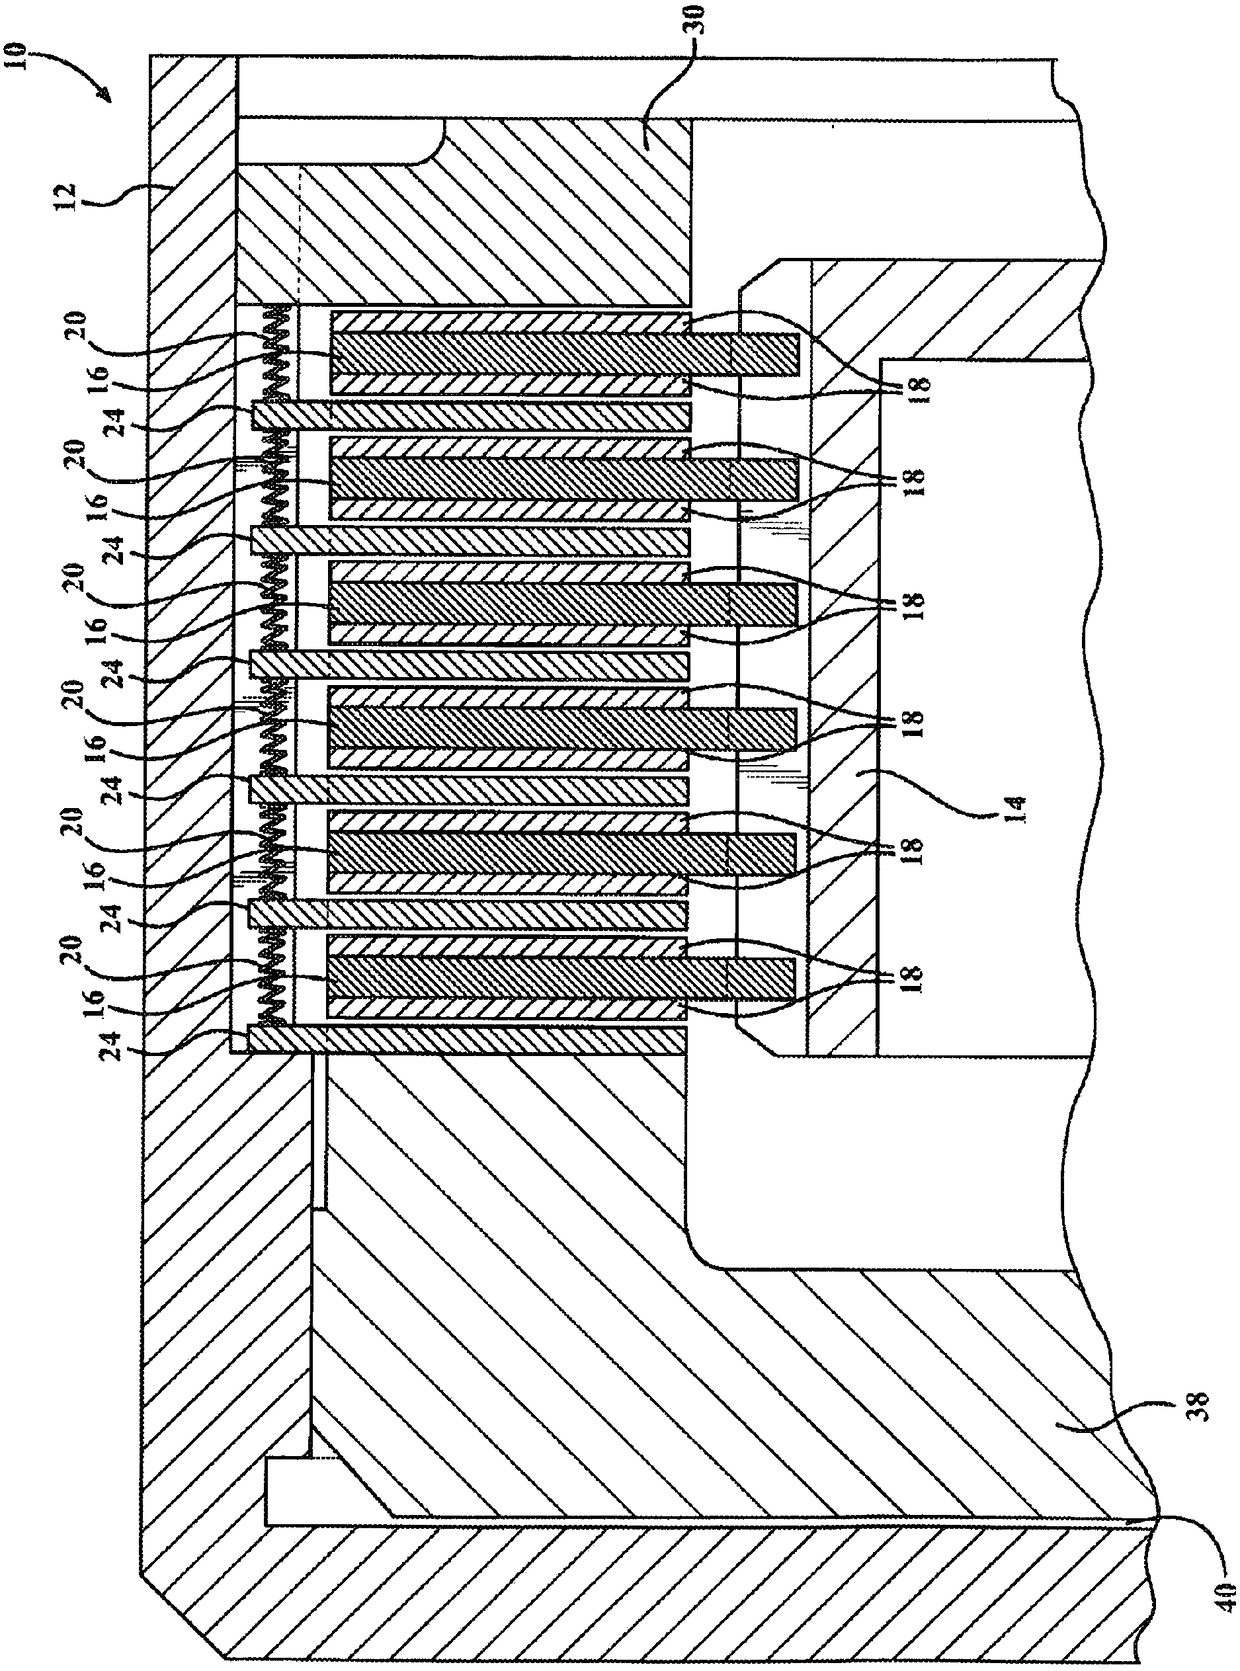 Methods and apparatus for clutch and brake drag reduction using springs